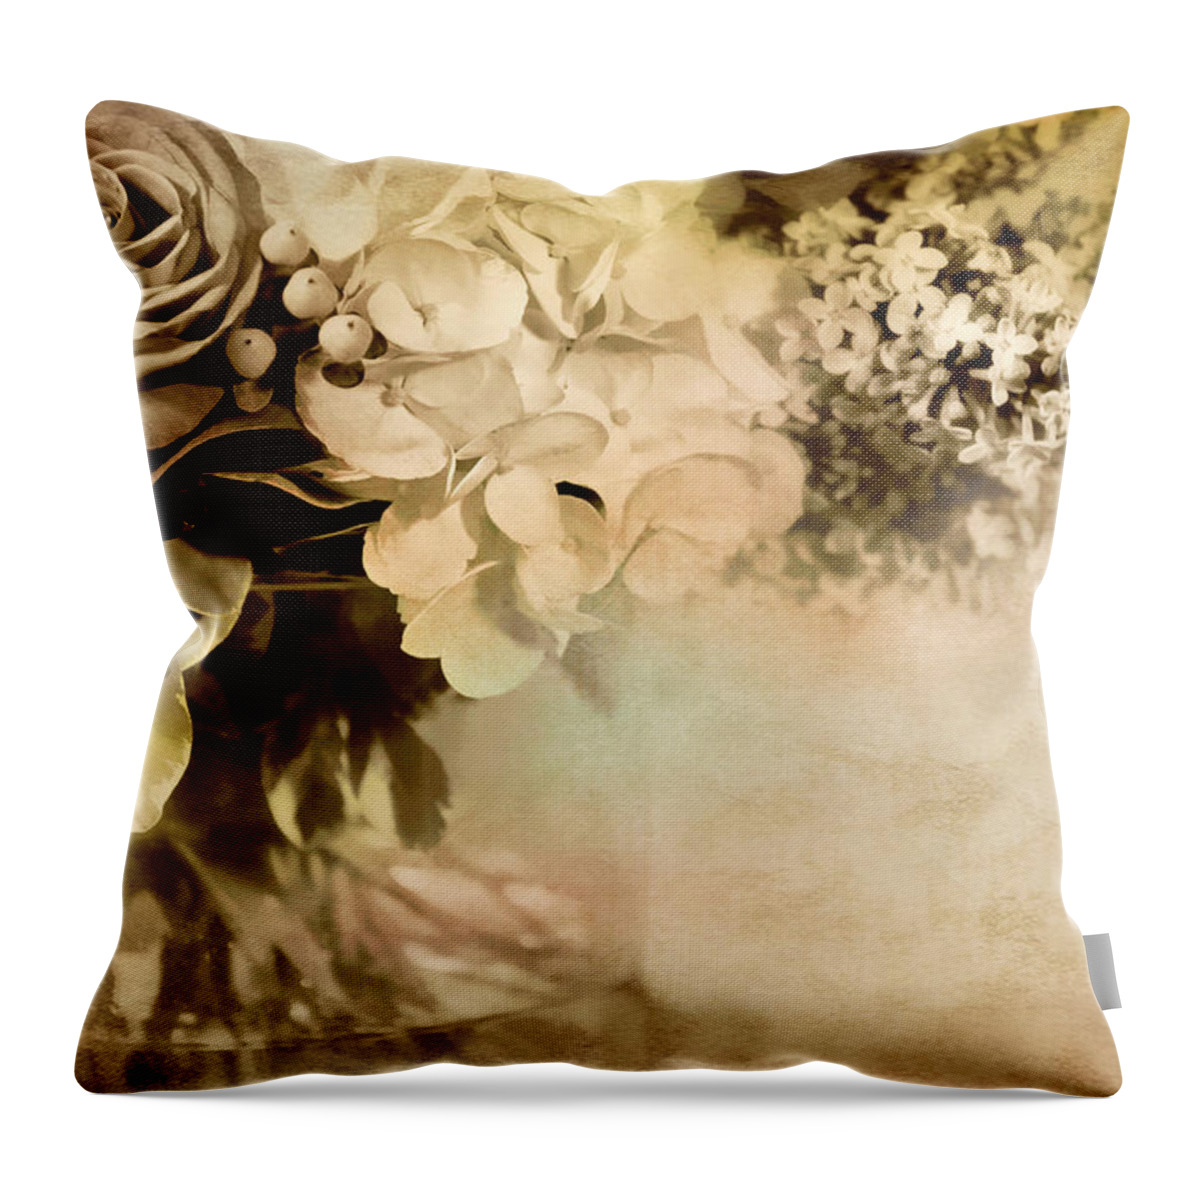 Ageless Throw Pillow featuring the photograph Ageless by Diana Angstadt